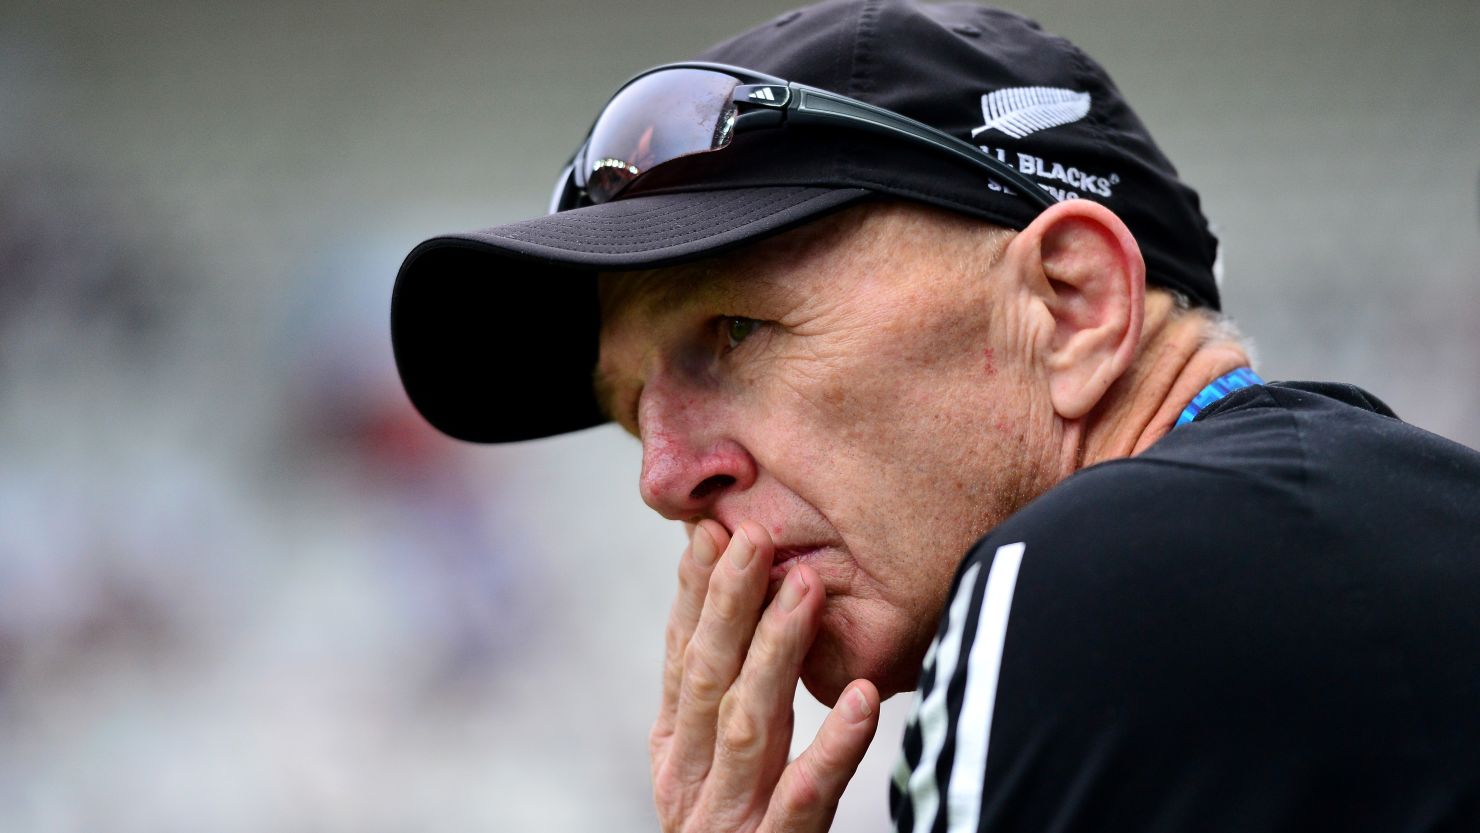 Tietjens is the most successful coach in the history of rugby sevens.